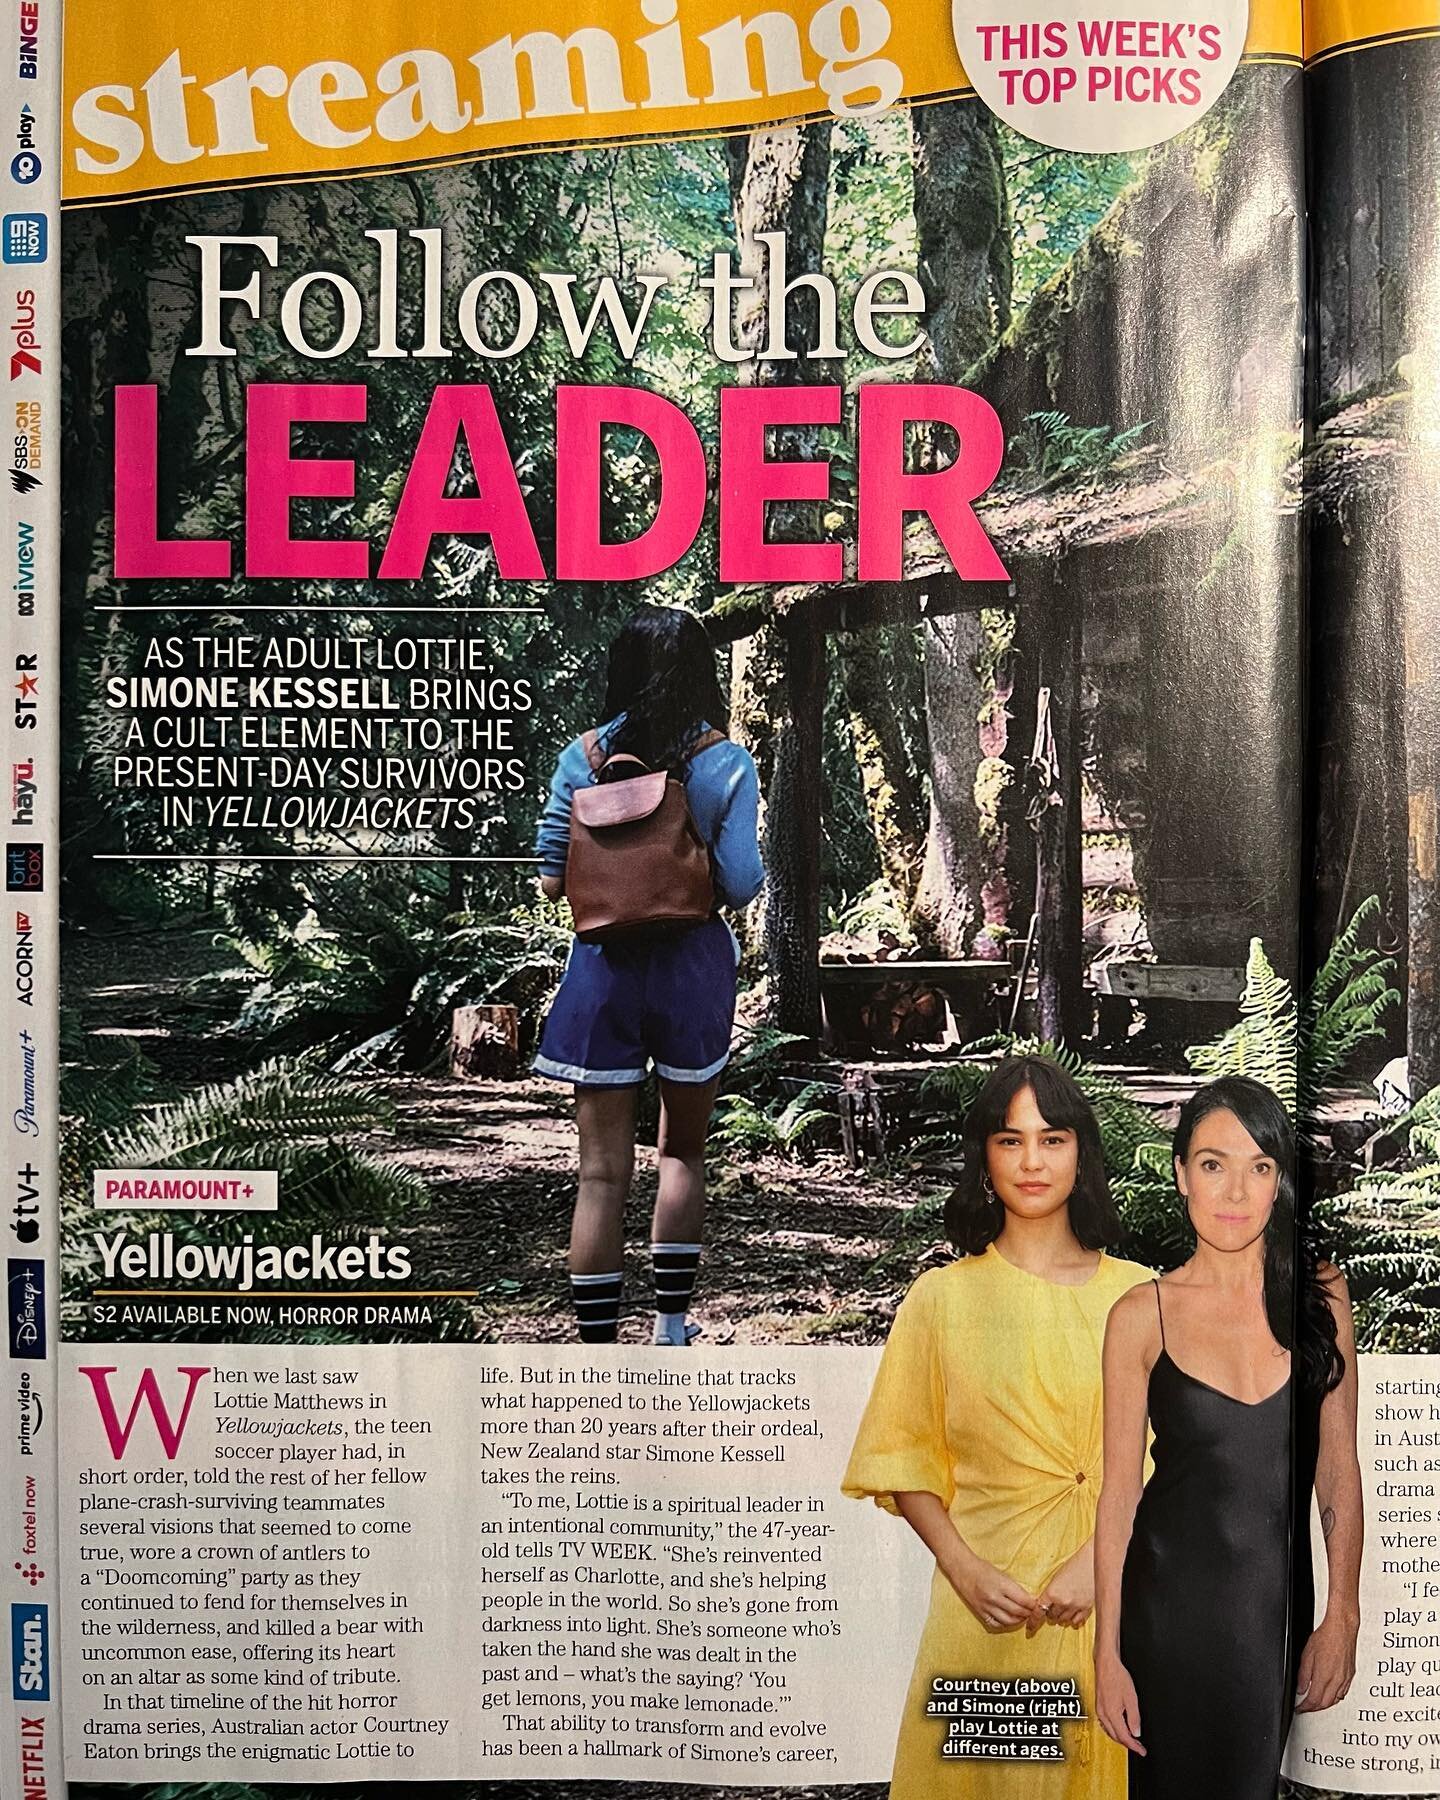 Pick up the latest @tvweekmag on newsstands this week for my chat with Simone Kessell about playing the adult Lottie in season 2 of Yellowjackets! Thank you, Simone, for your time and enthusiasm! #simonekessell #yellowjackets #paramountplus #tvweek